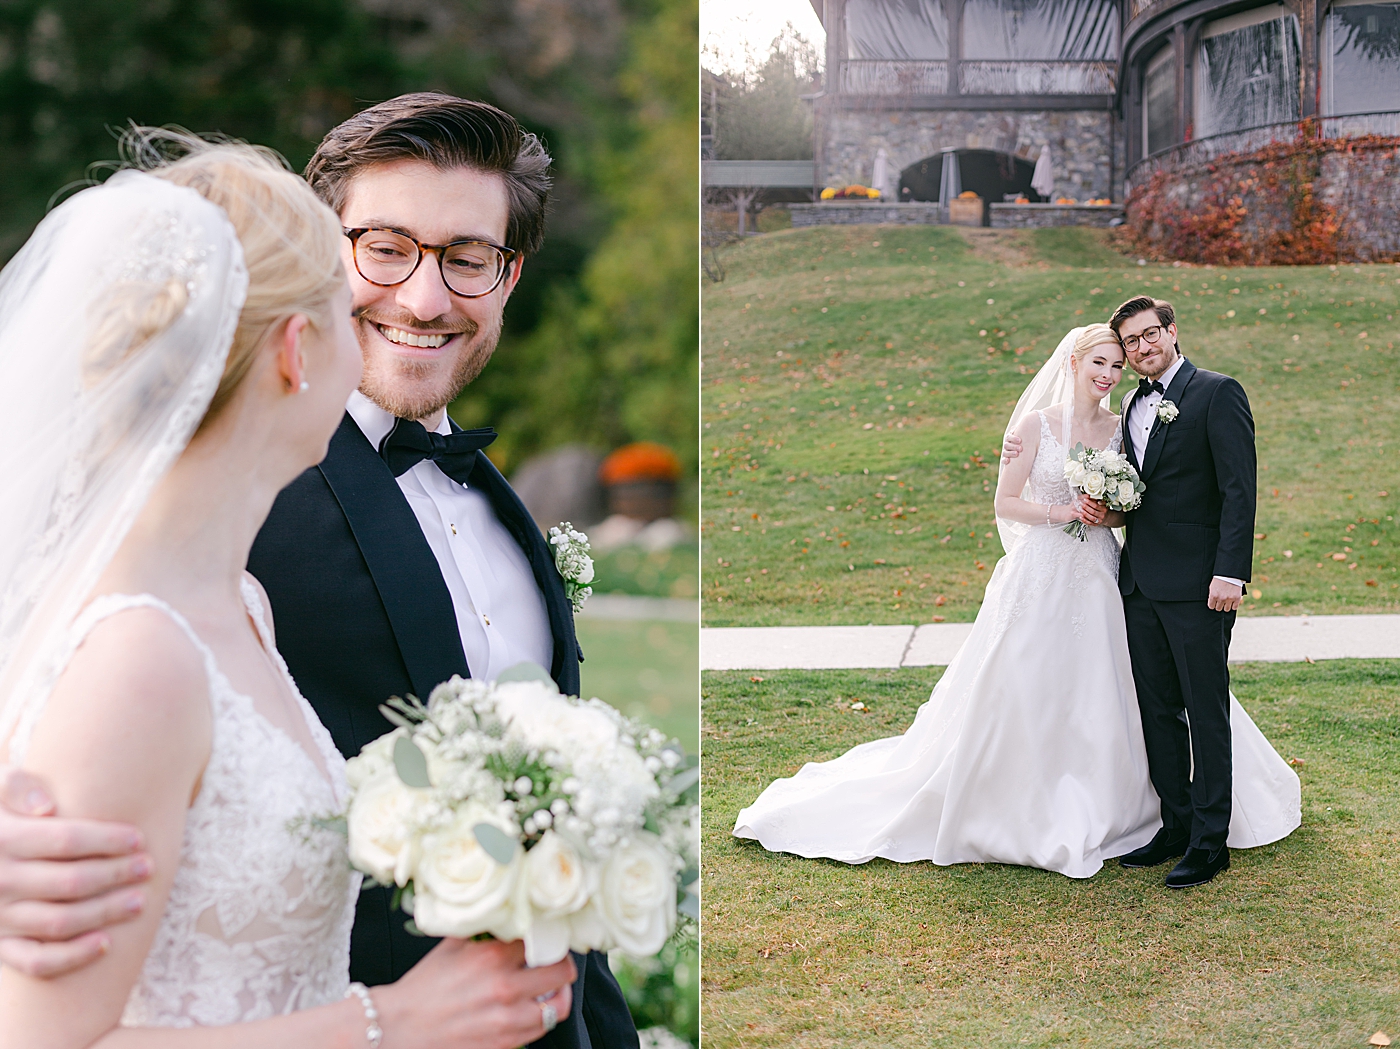 Bride and groom smiling | Image by Hope Helmuth Photography